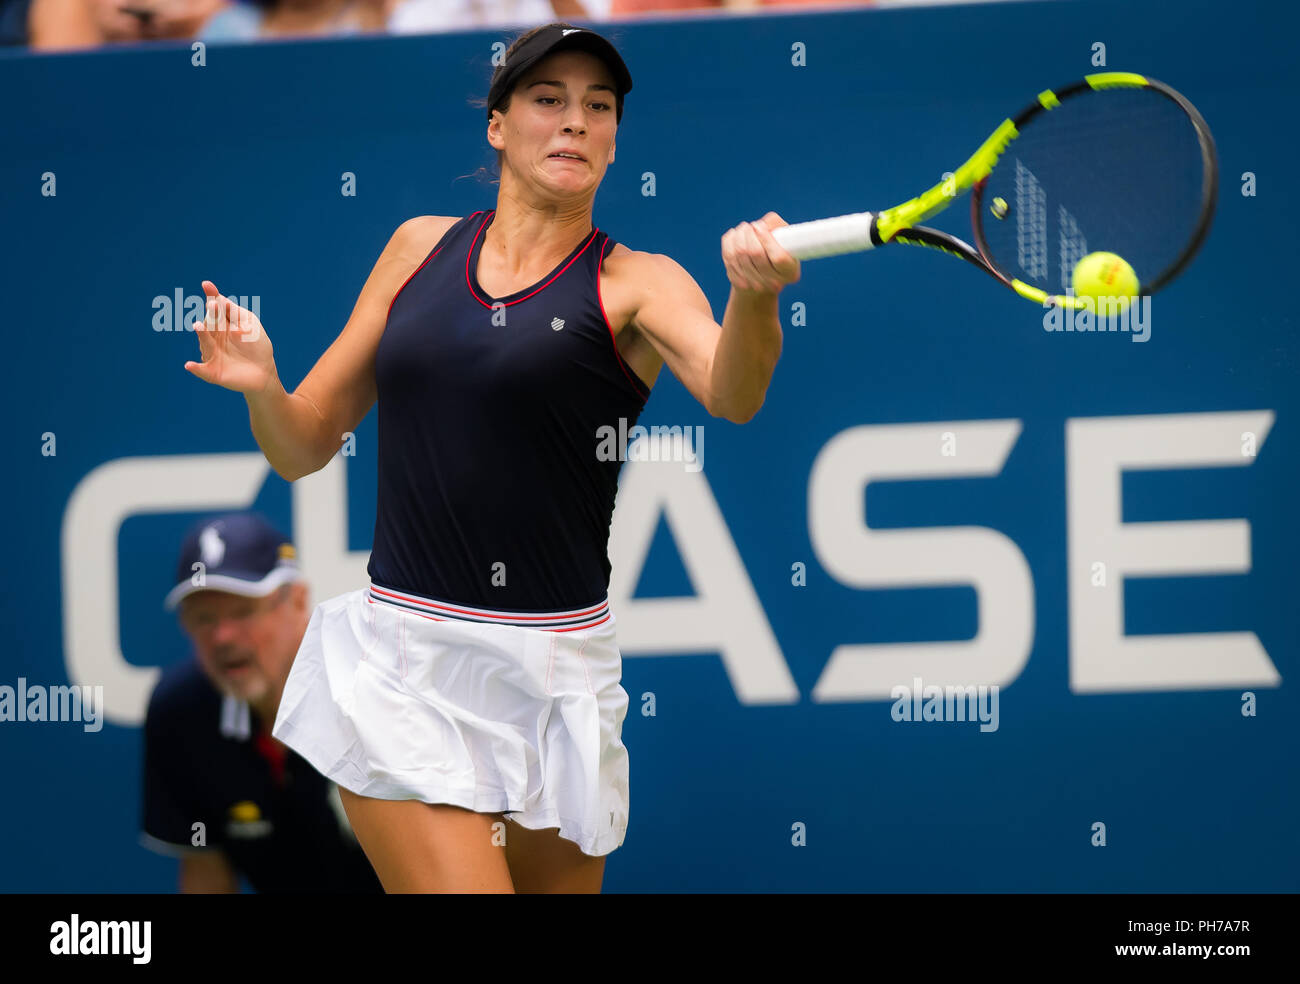 New York, USA. 30th August 2018. Bernarda Pera of the United States in  action during her second round match at the 2018 US Open Grand Slam tennis  tournament. New York, USA. August